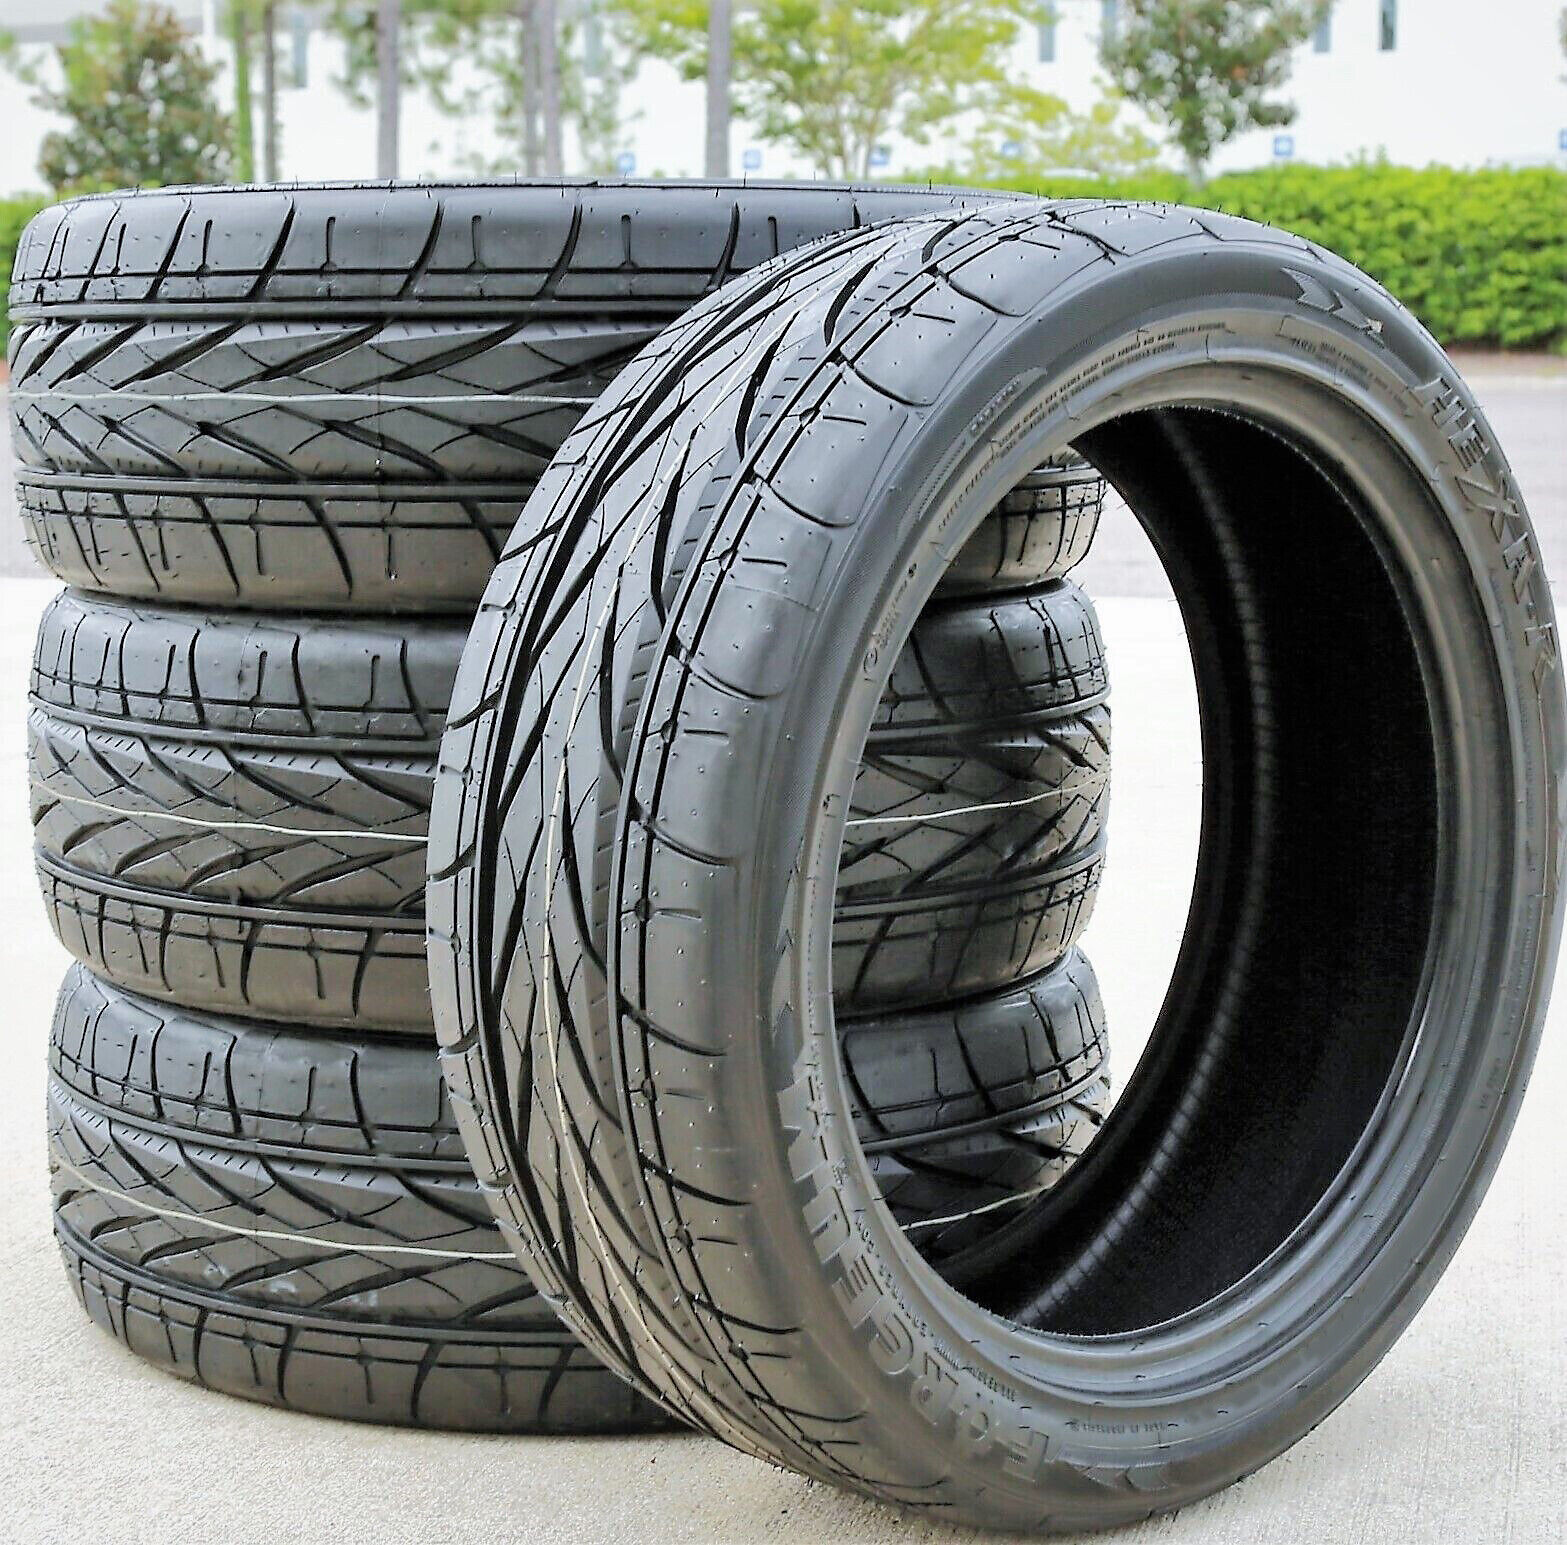 4 Tires Forceum Hexa-R 185/60R15 88V XL AS Performance A/S